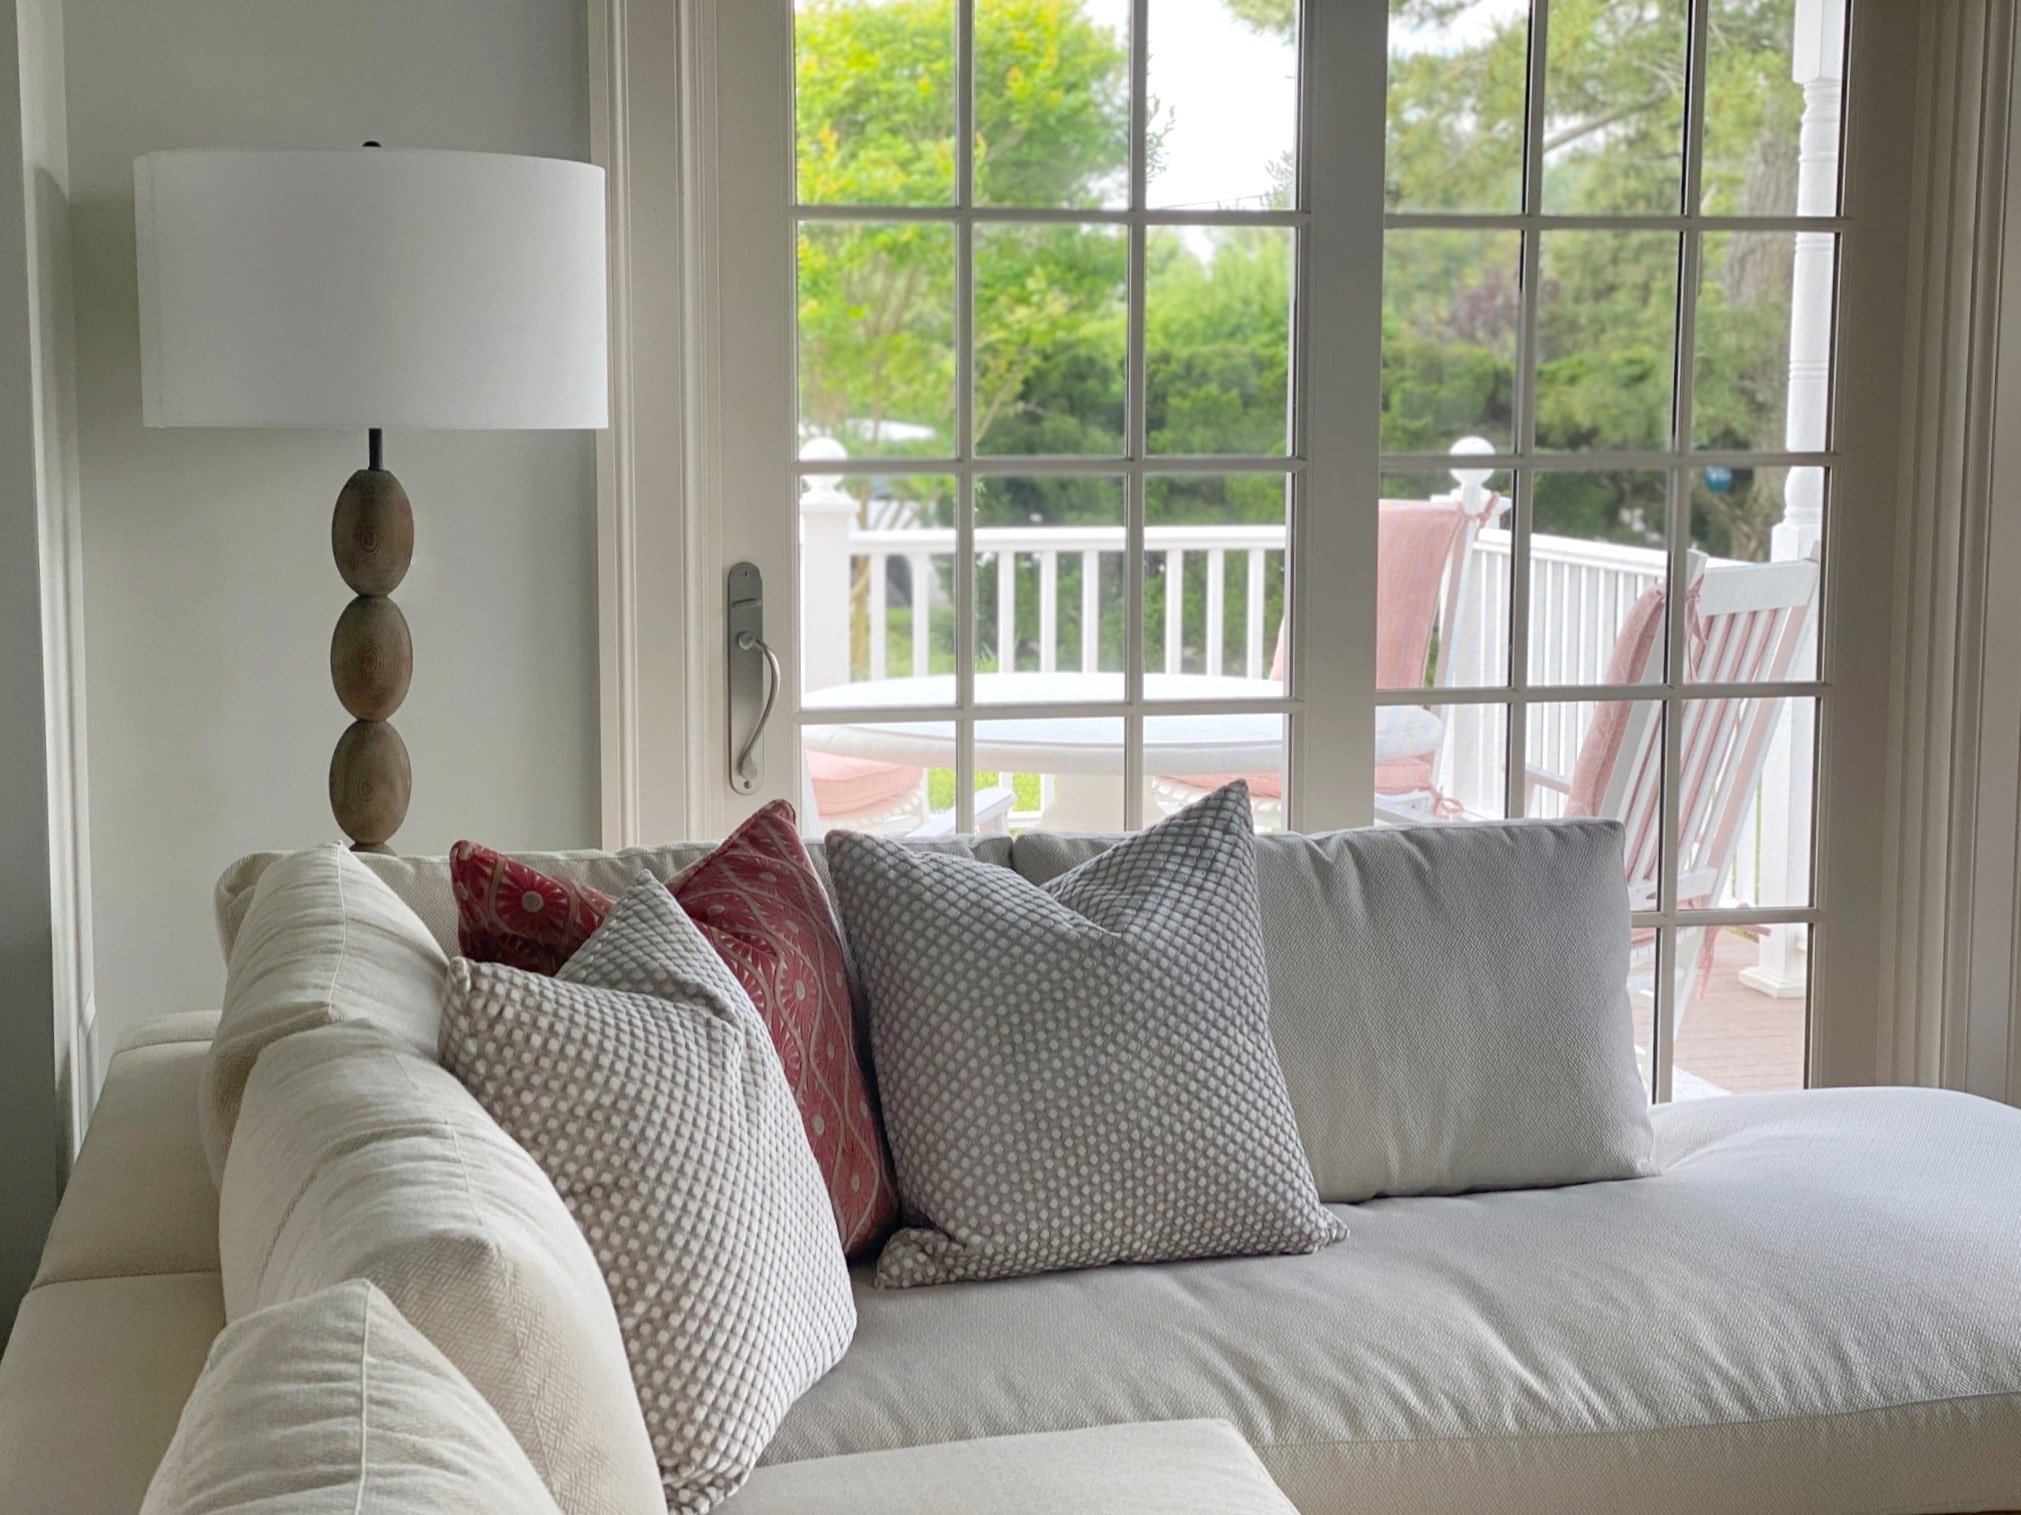 An interior design featuring a white couch and pillows in the living room.